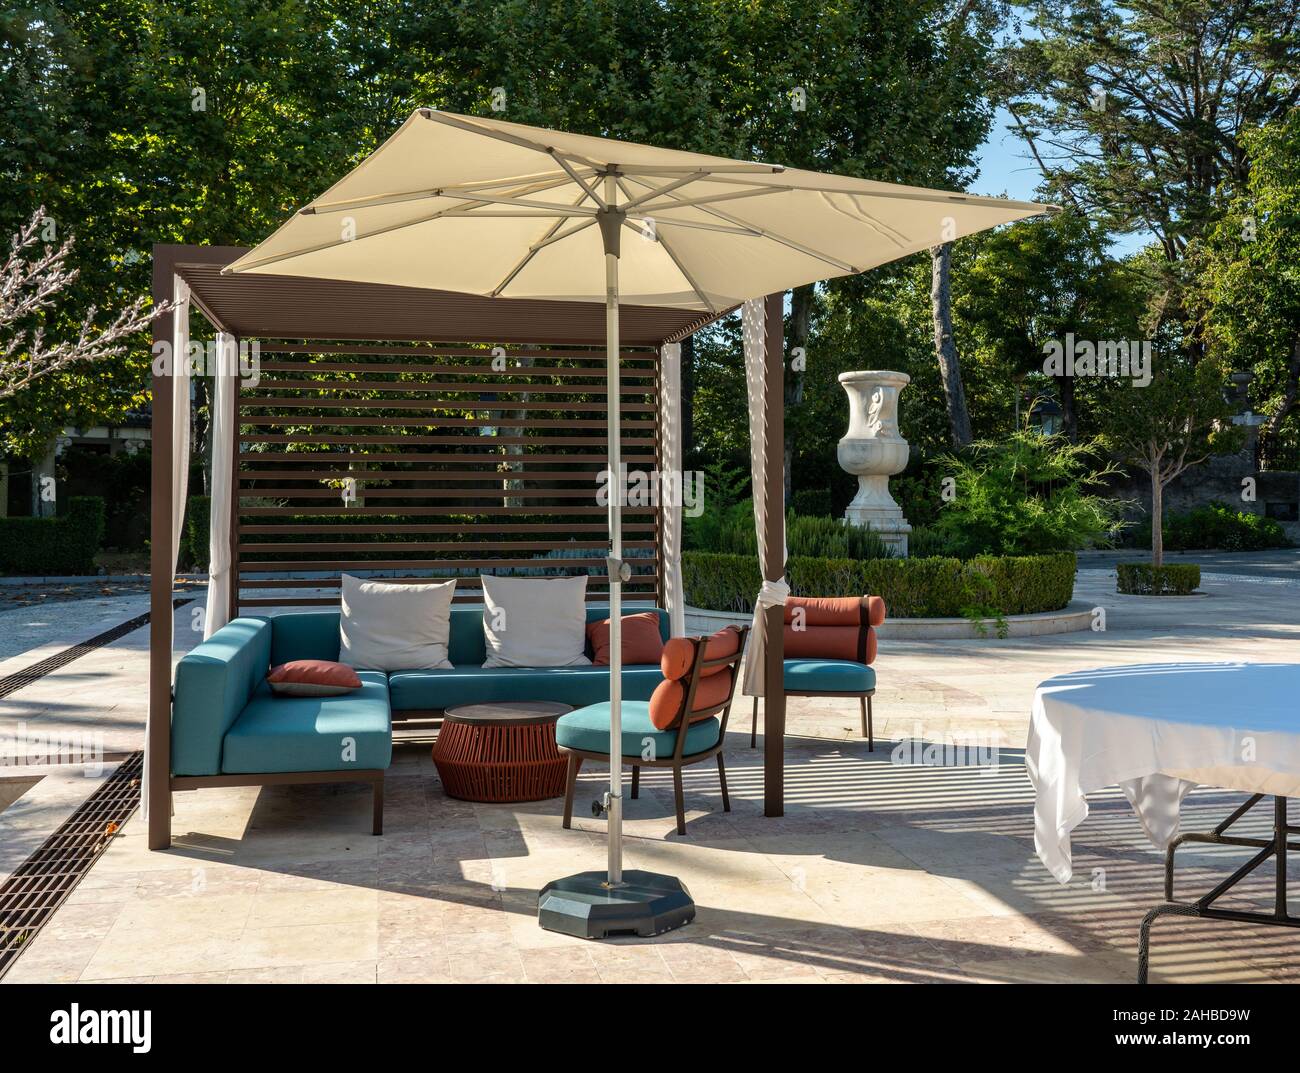 Modern outdoor furniture with umbrella on paved marble patio or courtyard Stock Photo